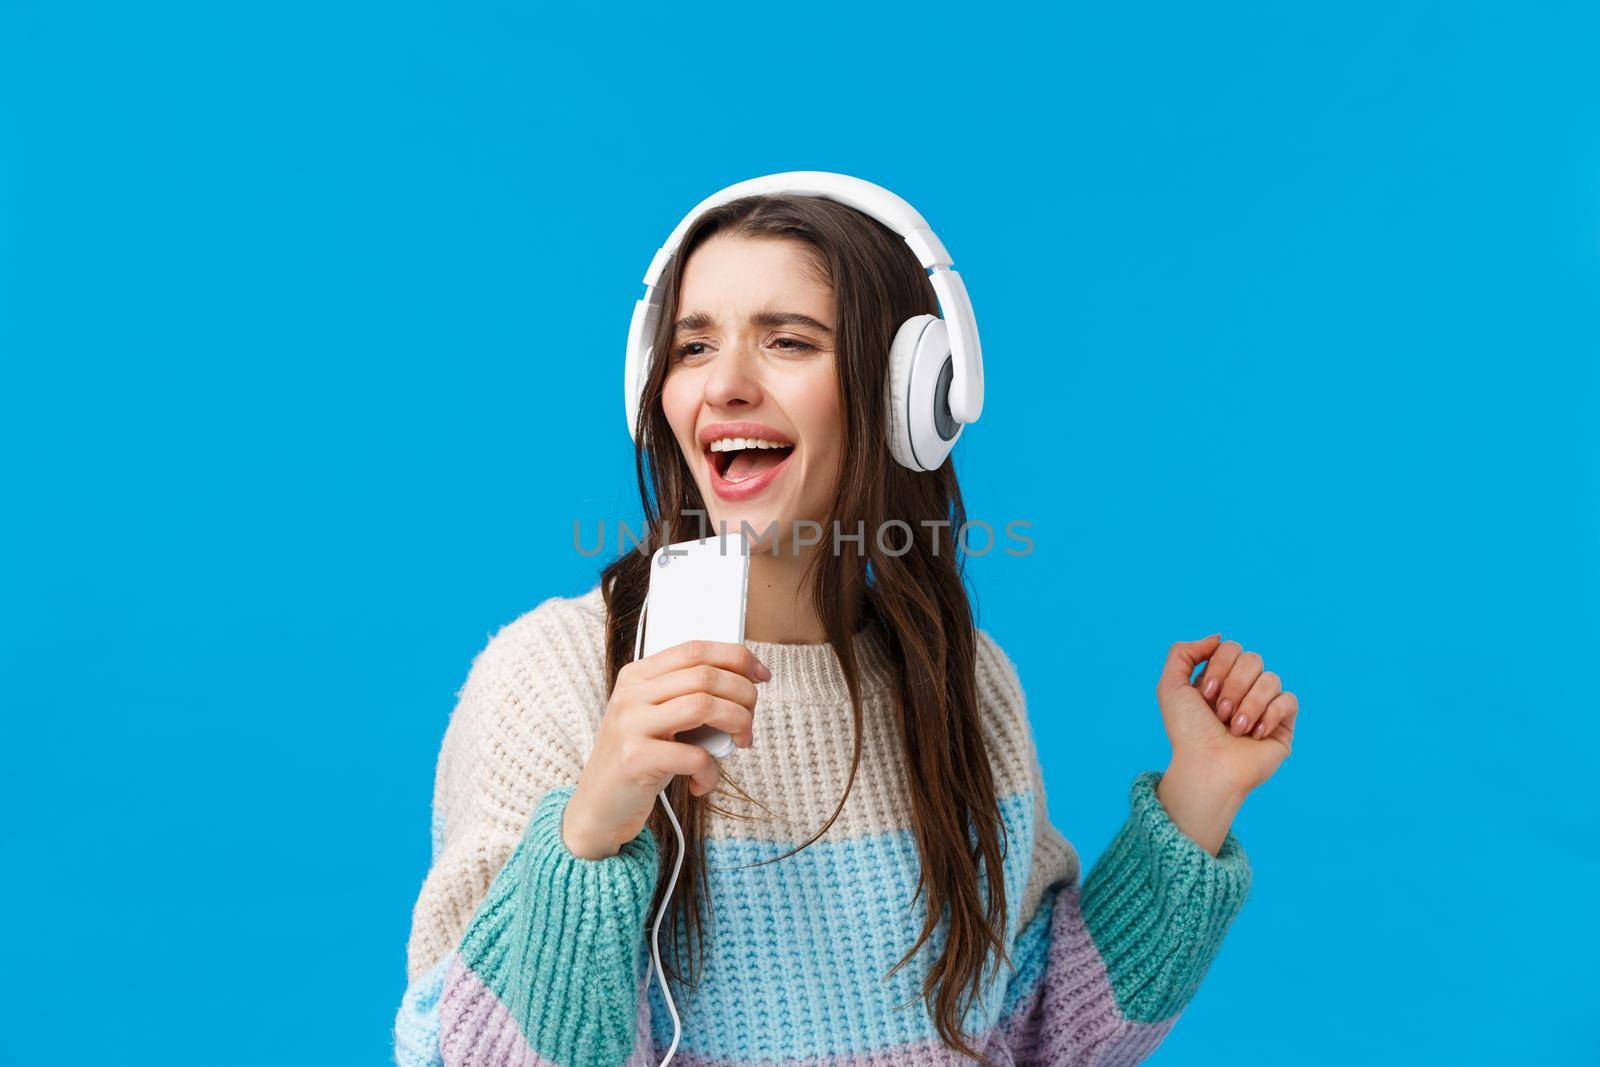 Waist-up portrait carefree good-looking young brunette woman playing karaoke game on phone, holding smartphone like mic, singing into phone dancing, listen music in headphones, blue background.